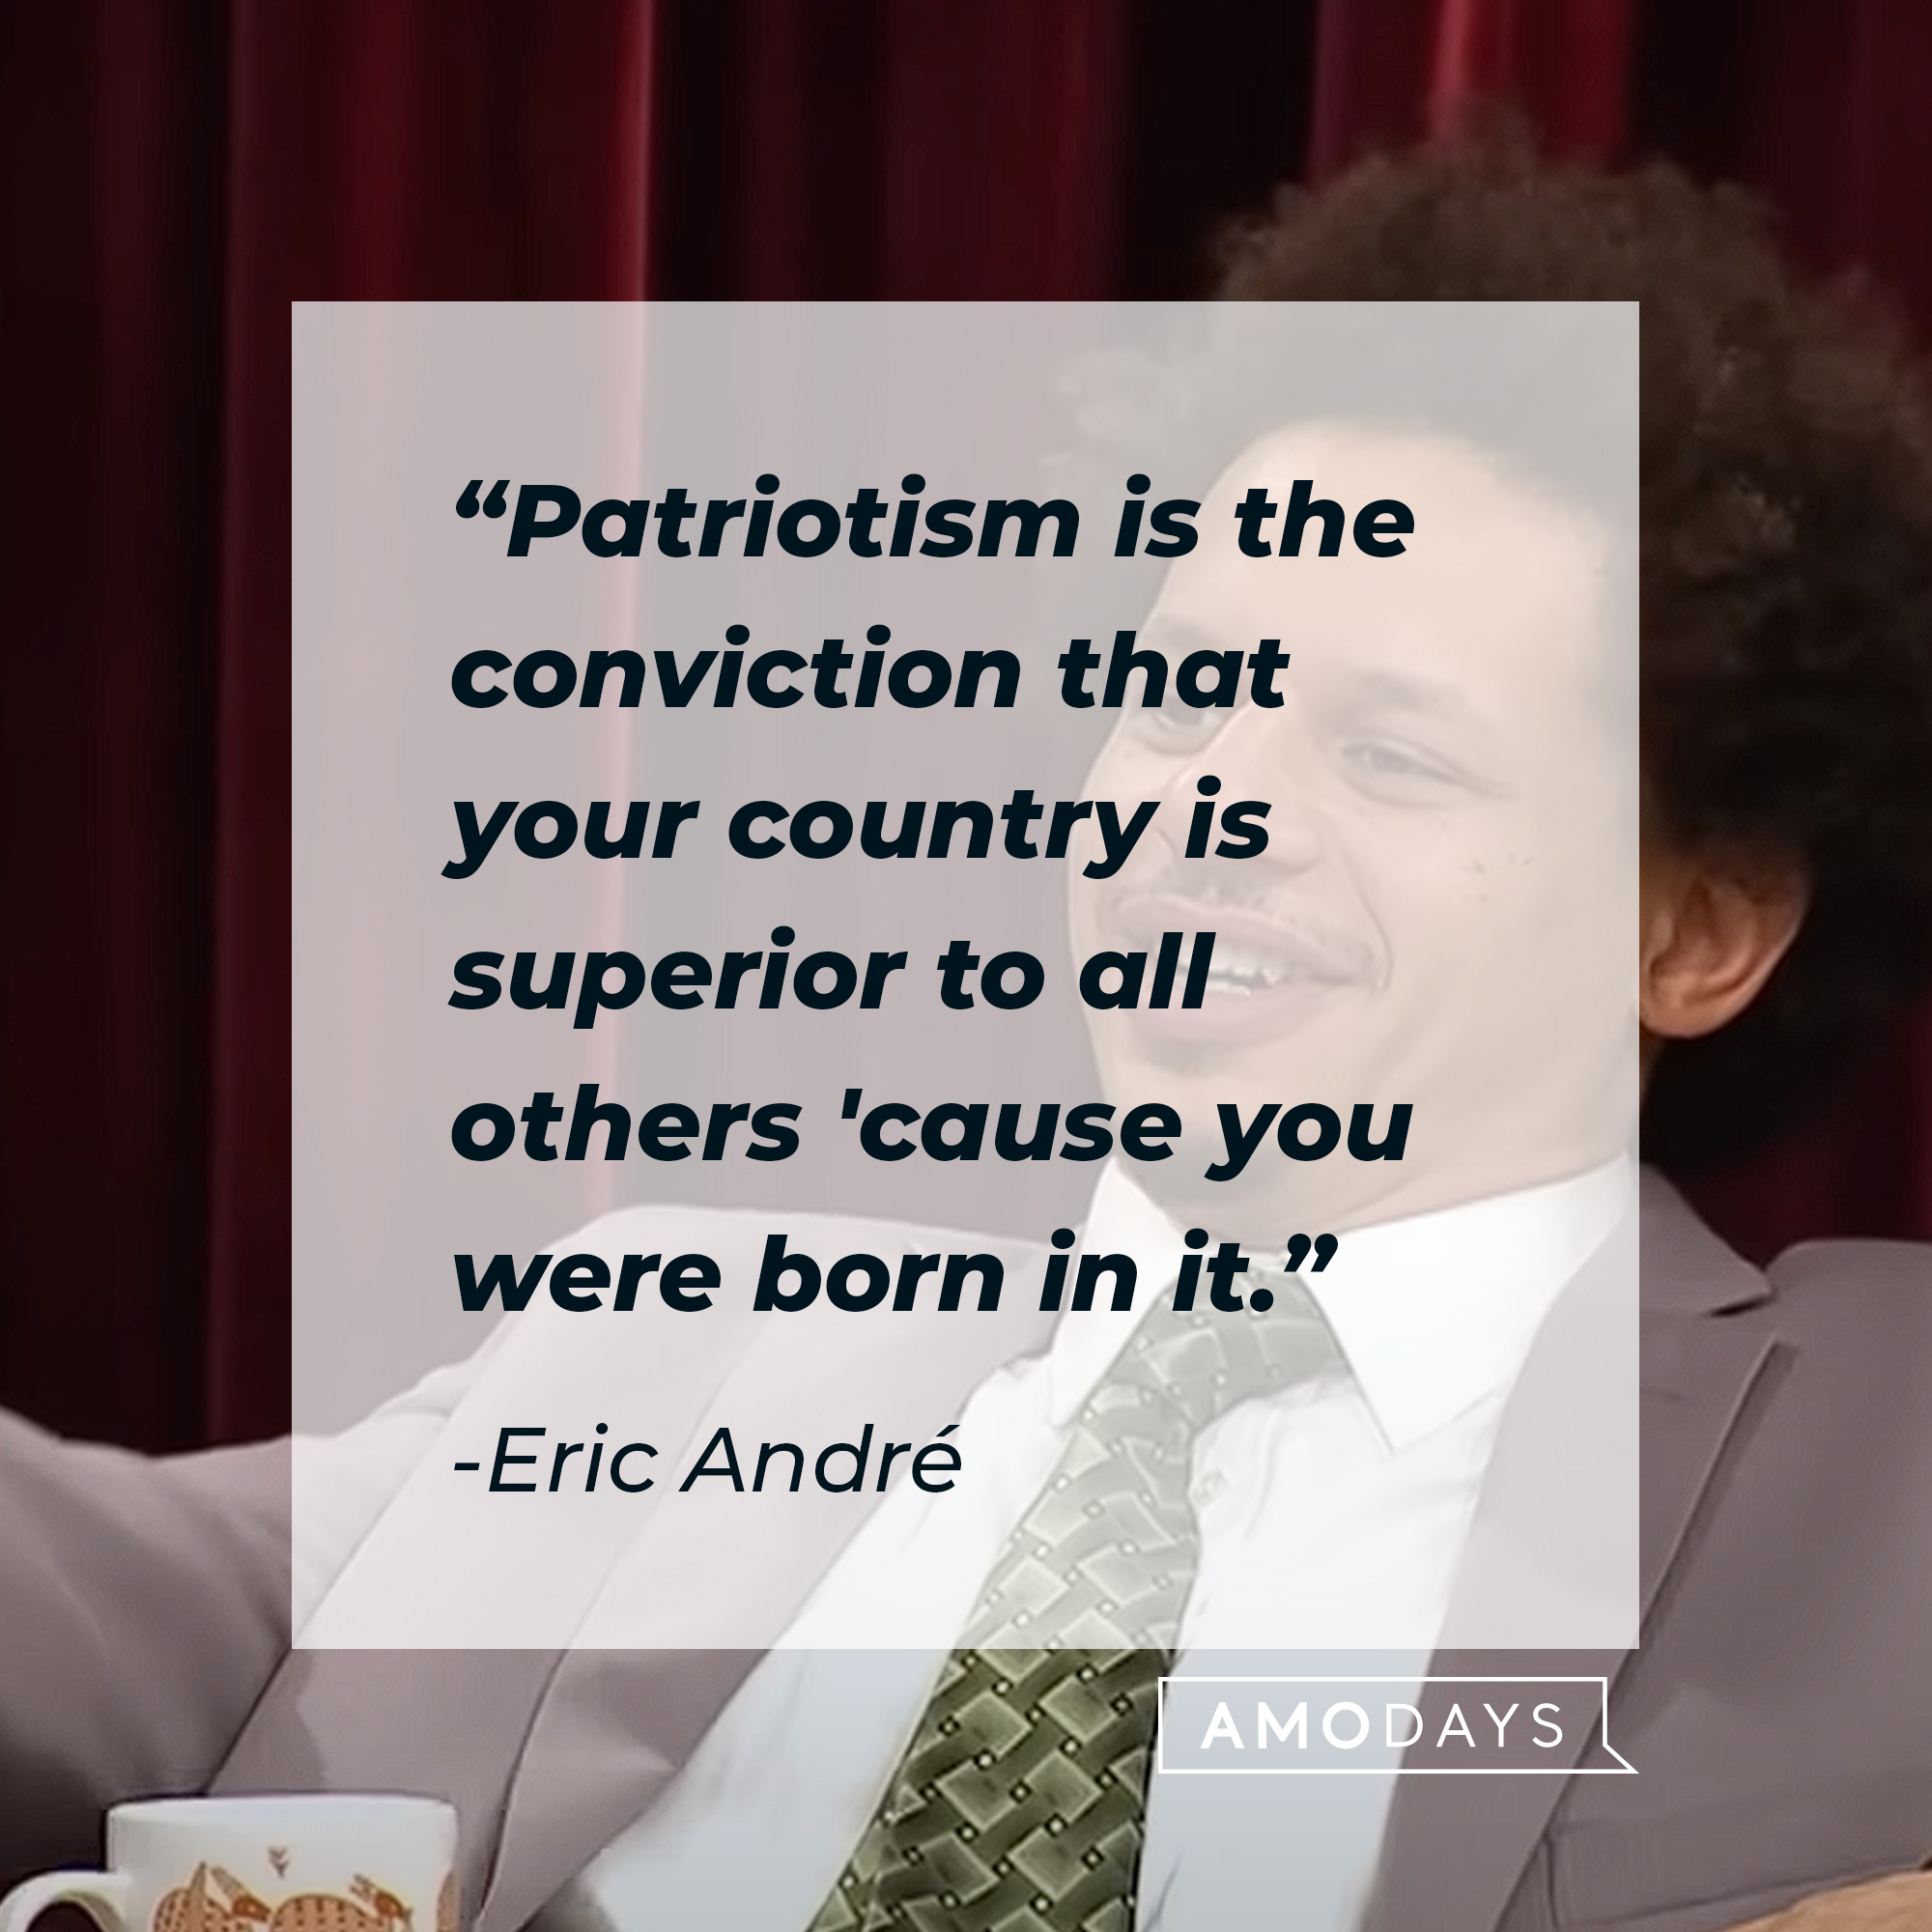 Eric André's quote: "Patriotism is the conviction that your country is superior to all others 'cause you were born in it." | Source: Youtube.com/adultswim